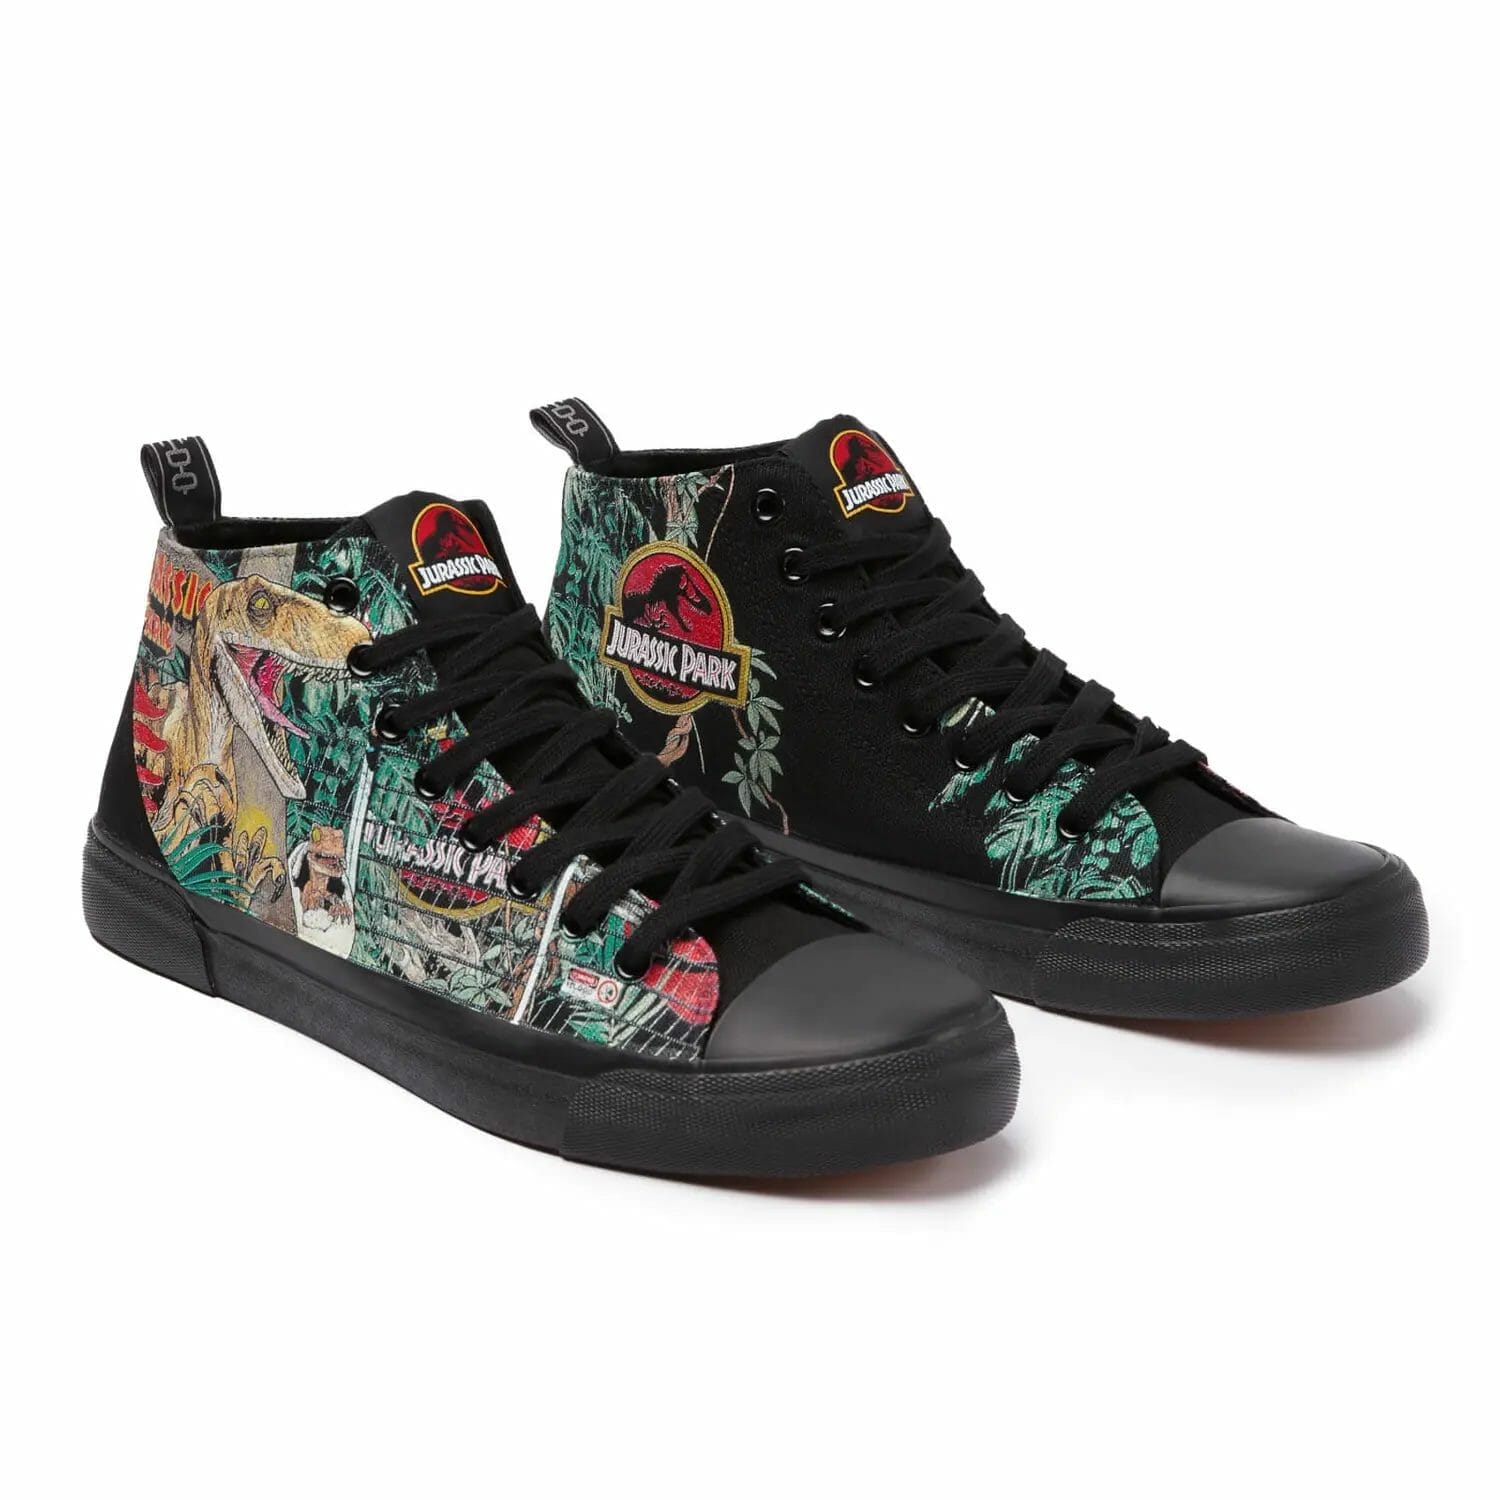 These shoes were meant for dinosaur hunting: Akedo brings Jurassic Park ...